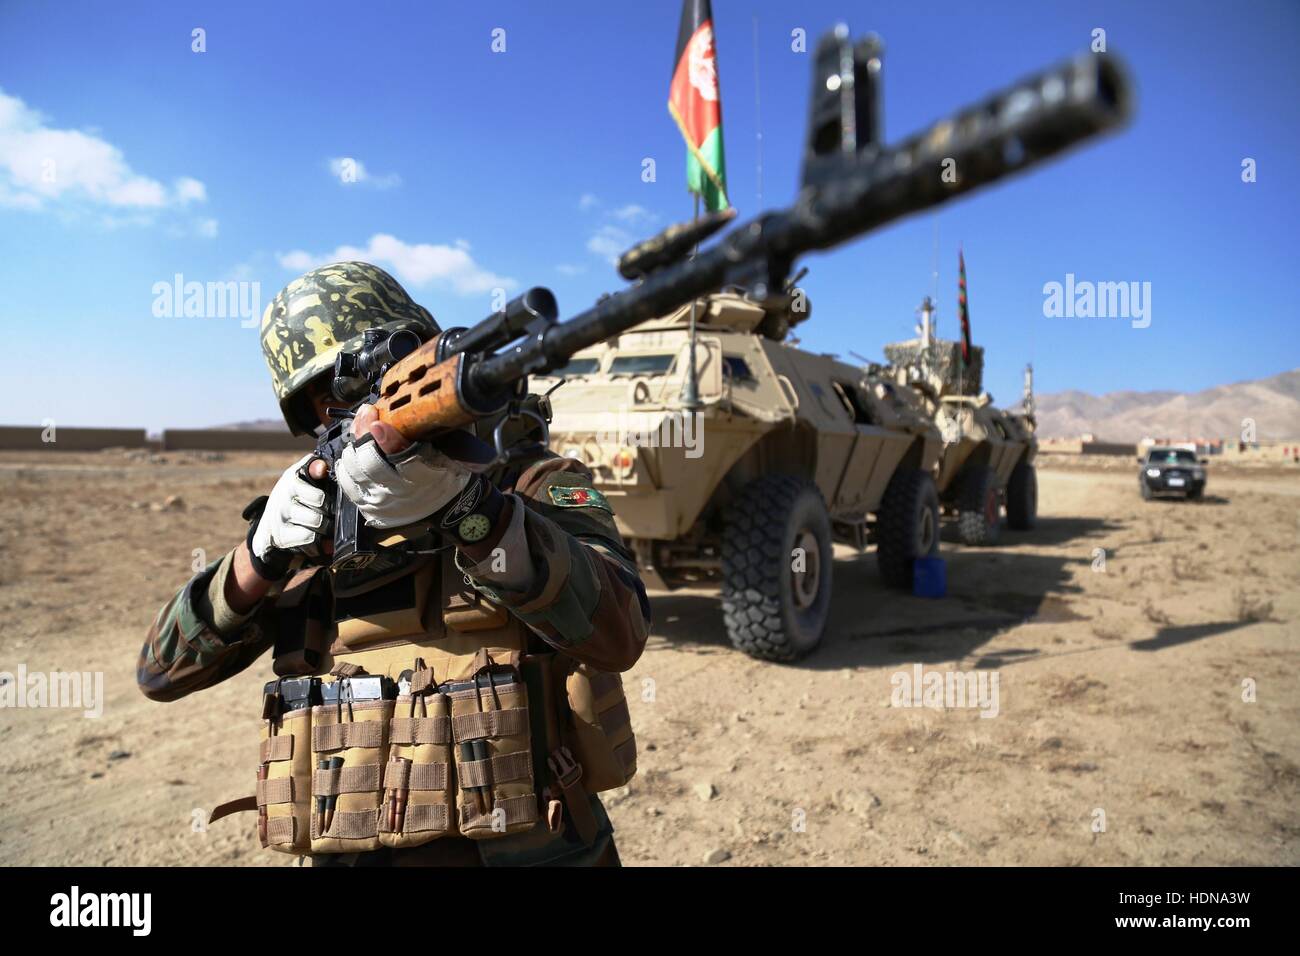 Ghazni province, Afghanistan. 14th December, 2016. An Afghan army soldier takes part in a military operation in Ghazni province, Afghanistan, Dec. 14, 2016. The Afghan National Security Forces (ANSF) had killed 29 insurgents in 13 of the country's 34 provinces since early Tuesday, the Defense Ministry said on Wednesday. (Xinhua/Sayed Mominzadah) (hy) Credit:  Xinhua/Alamy Live News Stock Photo